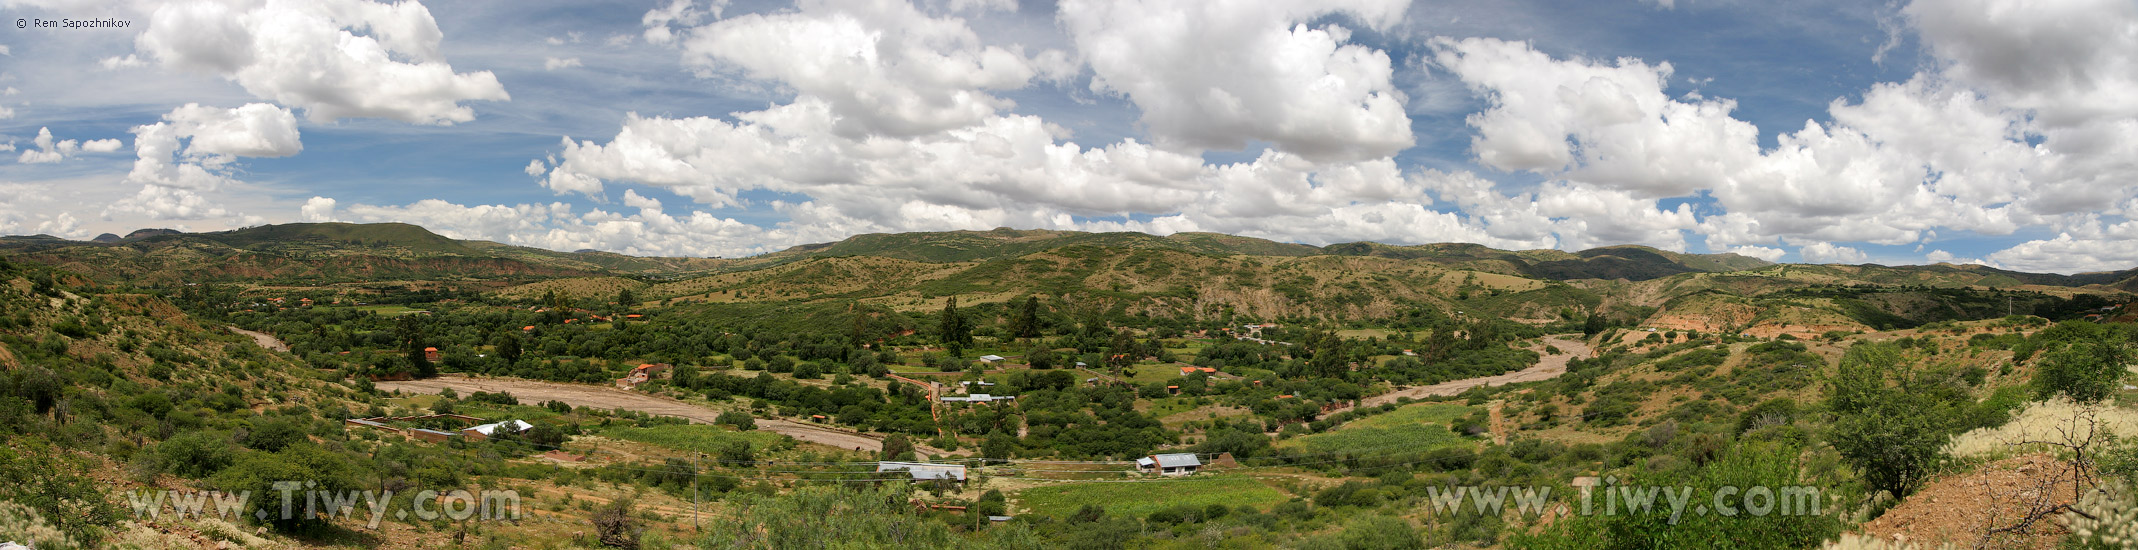 Road between Sucre and Potosi